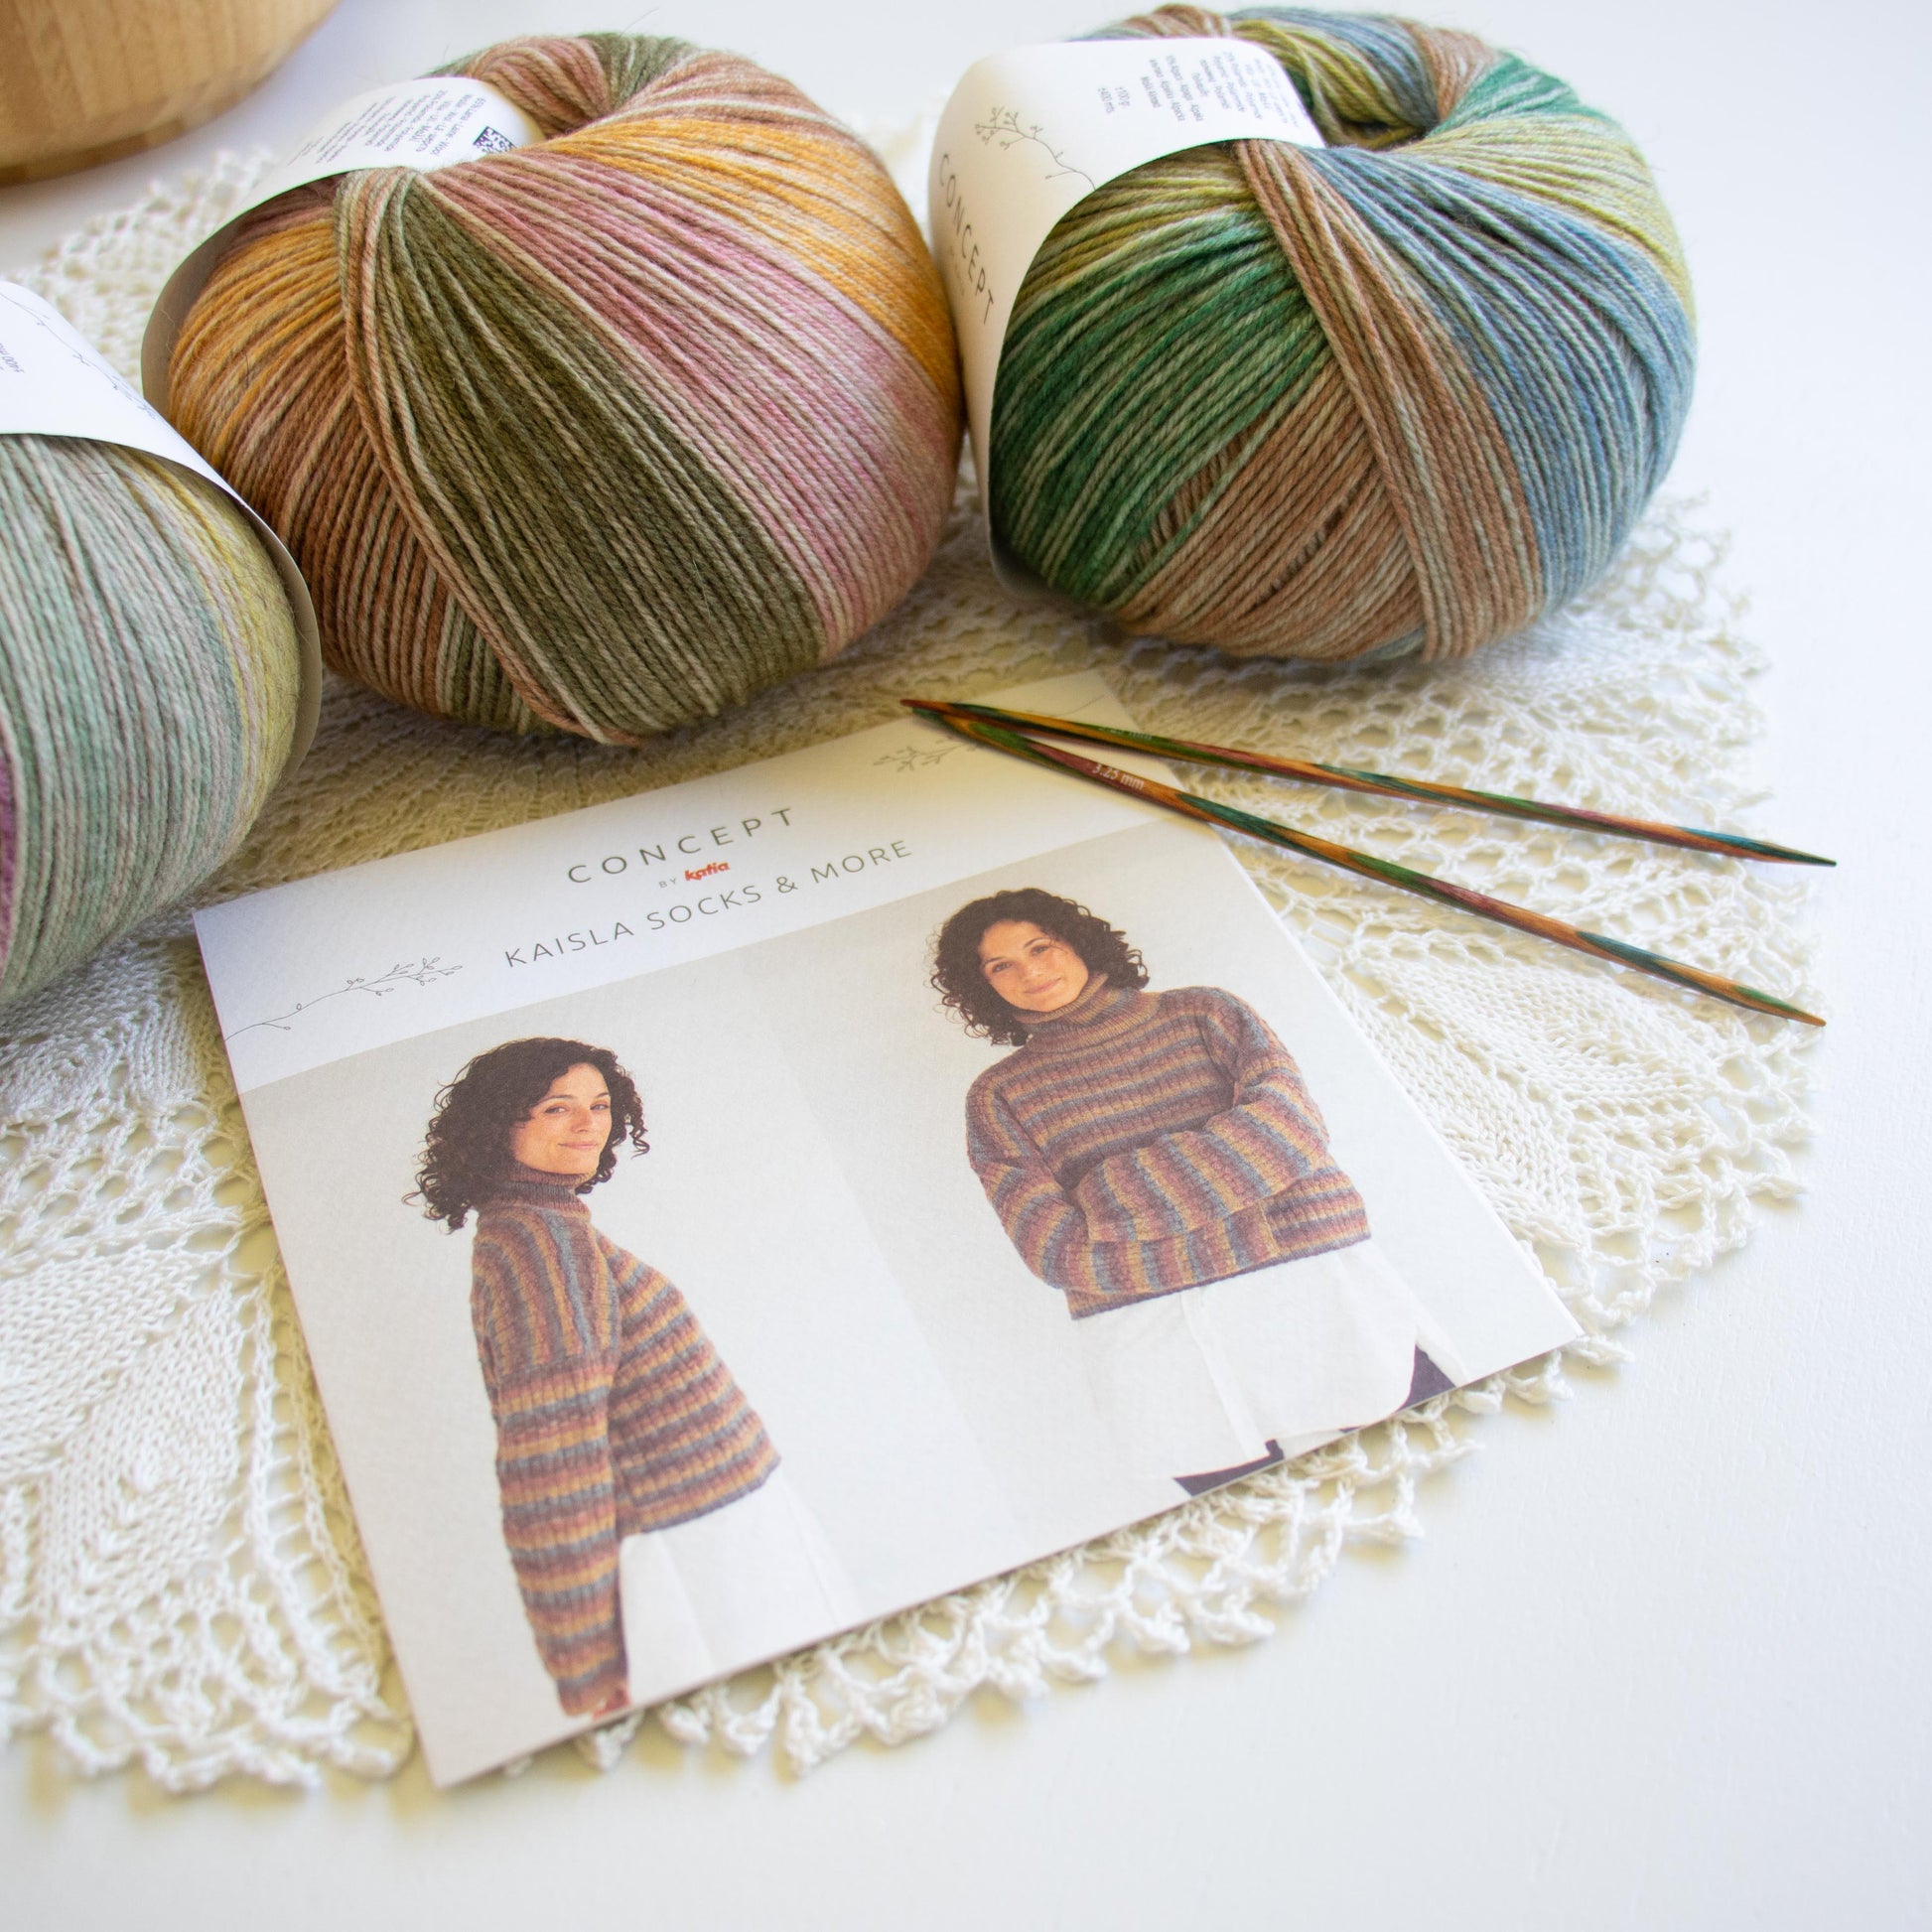 Free pattern leaflet with the purchase of two or more balls of Katia Kaisla